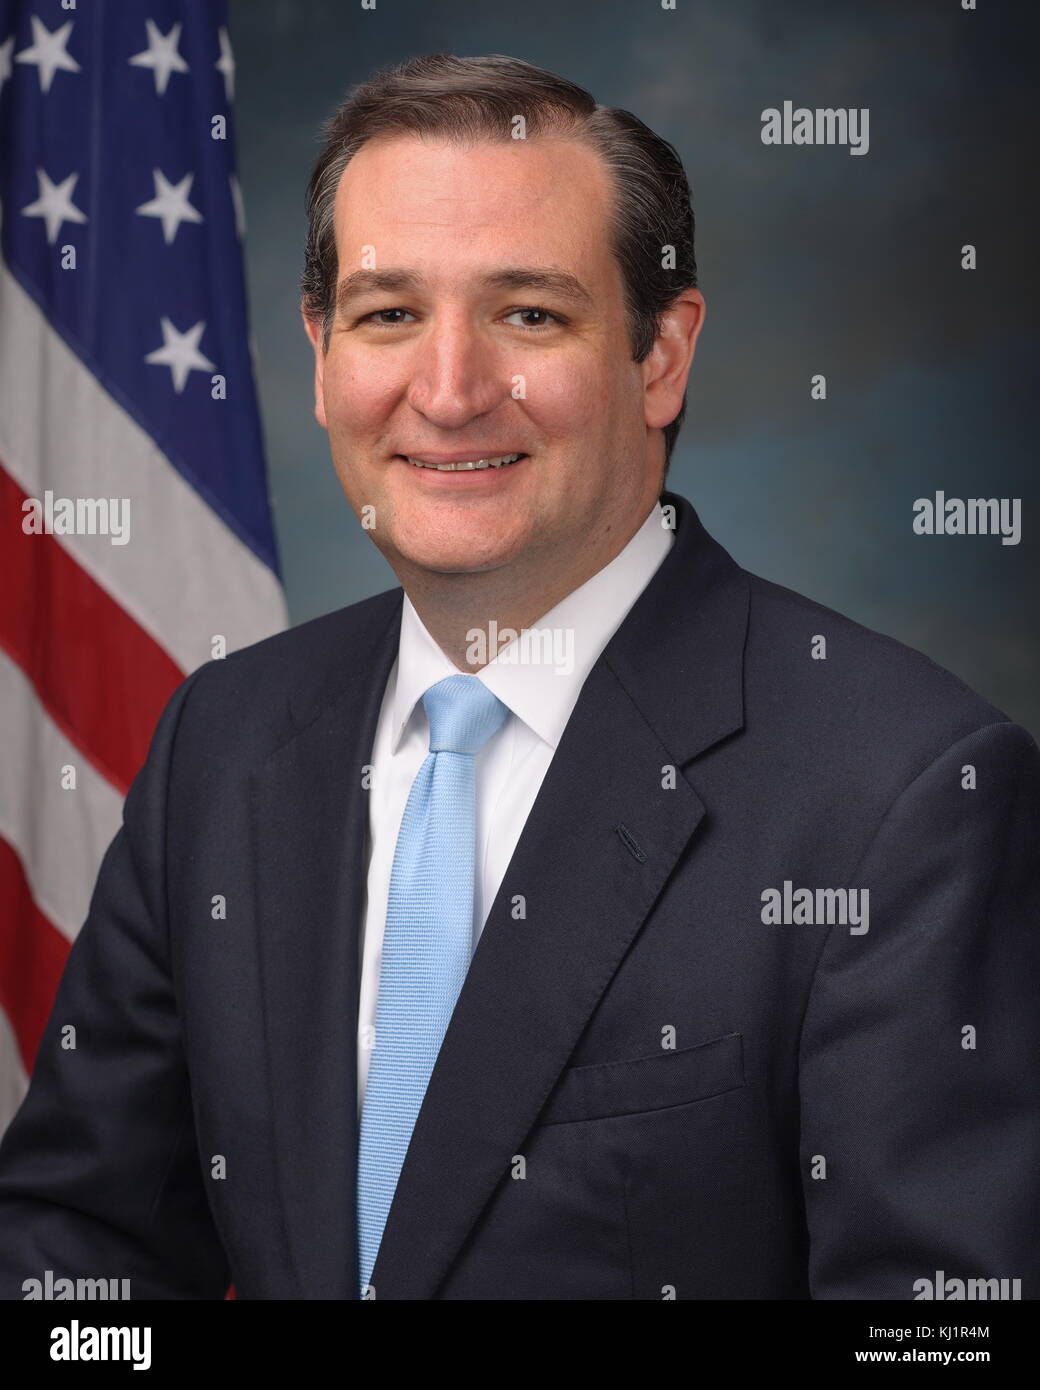 Rafael Edward 'Ted' Cruz (born December 22, 1970), American politician and attorney, who has served as the junior United States Senator from Texas since 2013.[1] He was a candidate for the Republican nomination for President of the United States in the 2016 election. Stock Photo